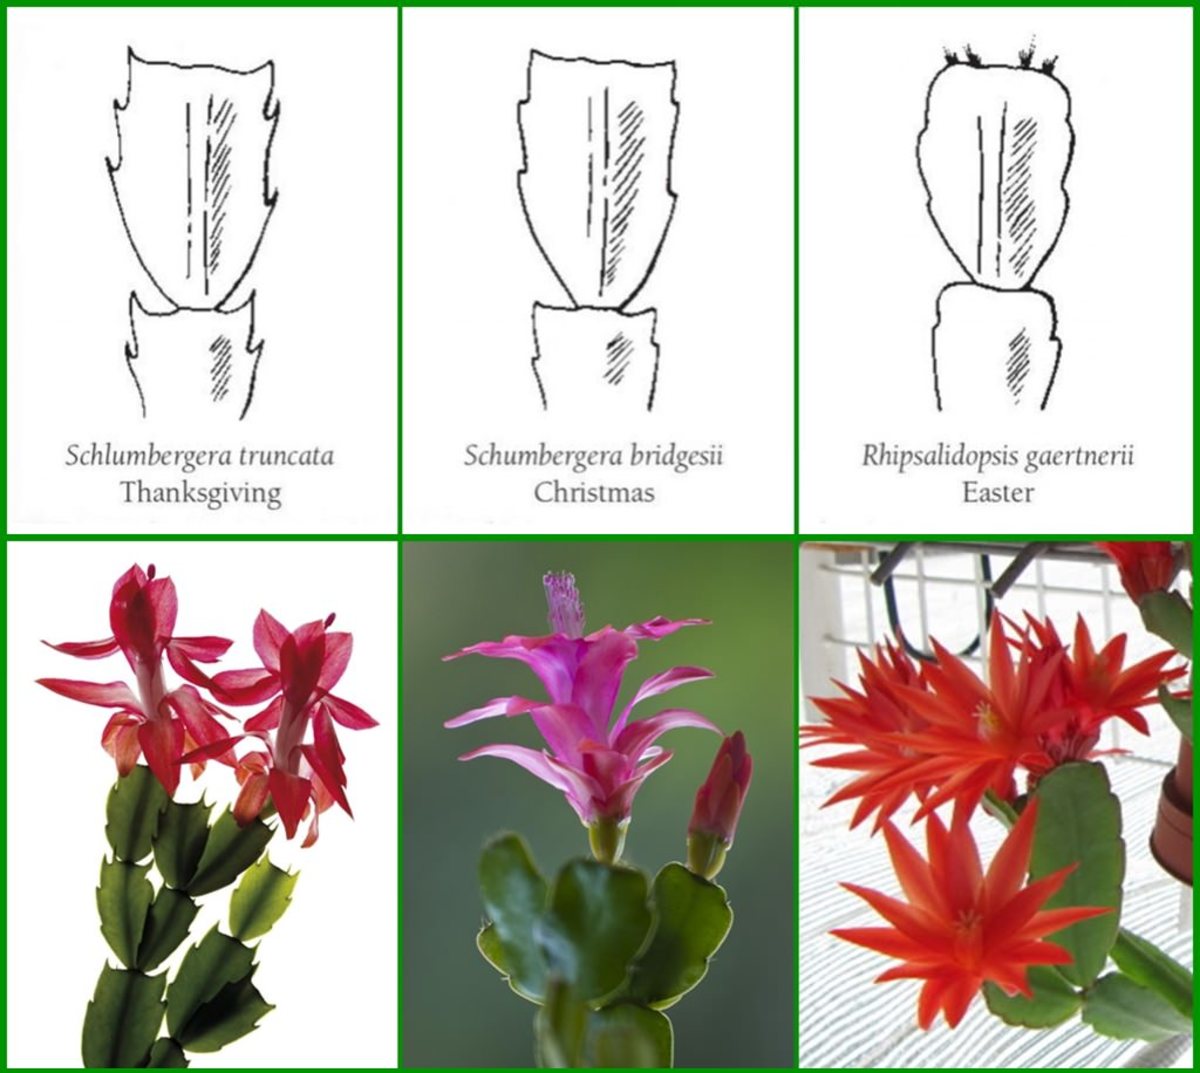 This is an easy way to understand the different types of holiday cactus.